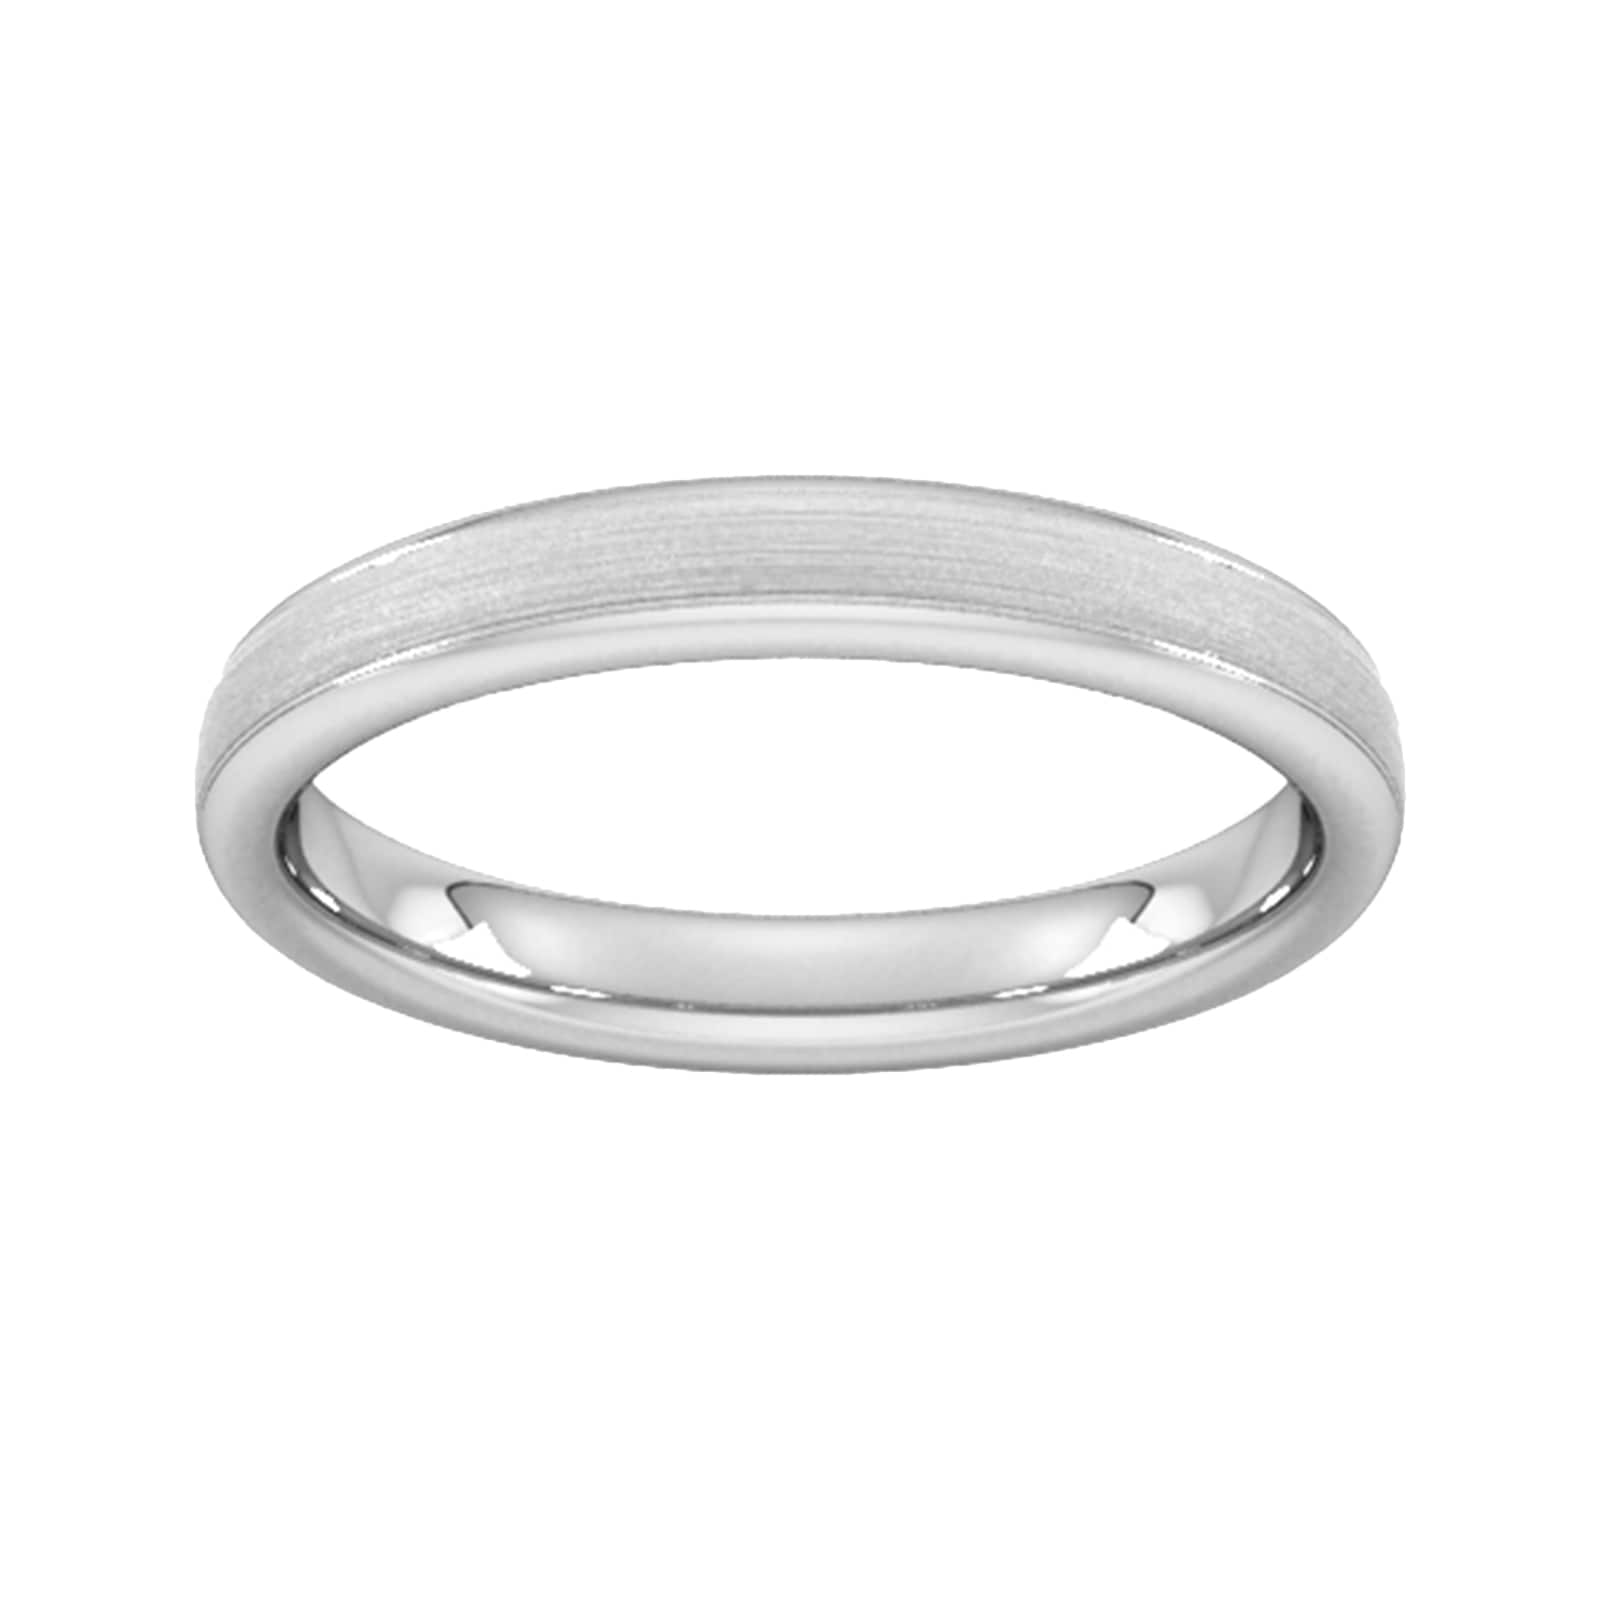 3mm Flat Court Heavy Matt Centre With Grooves Wedding Ring In 18 Carat White Gold - Ring Size J